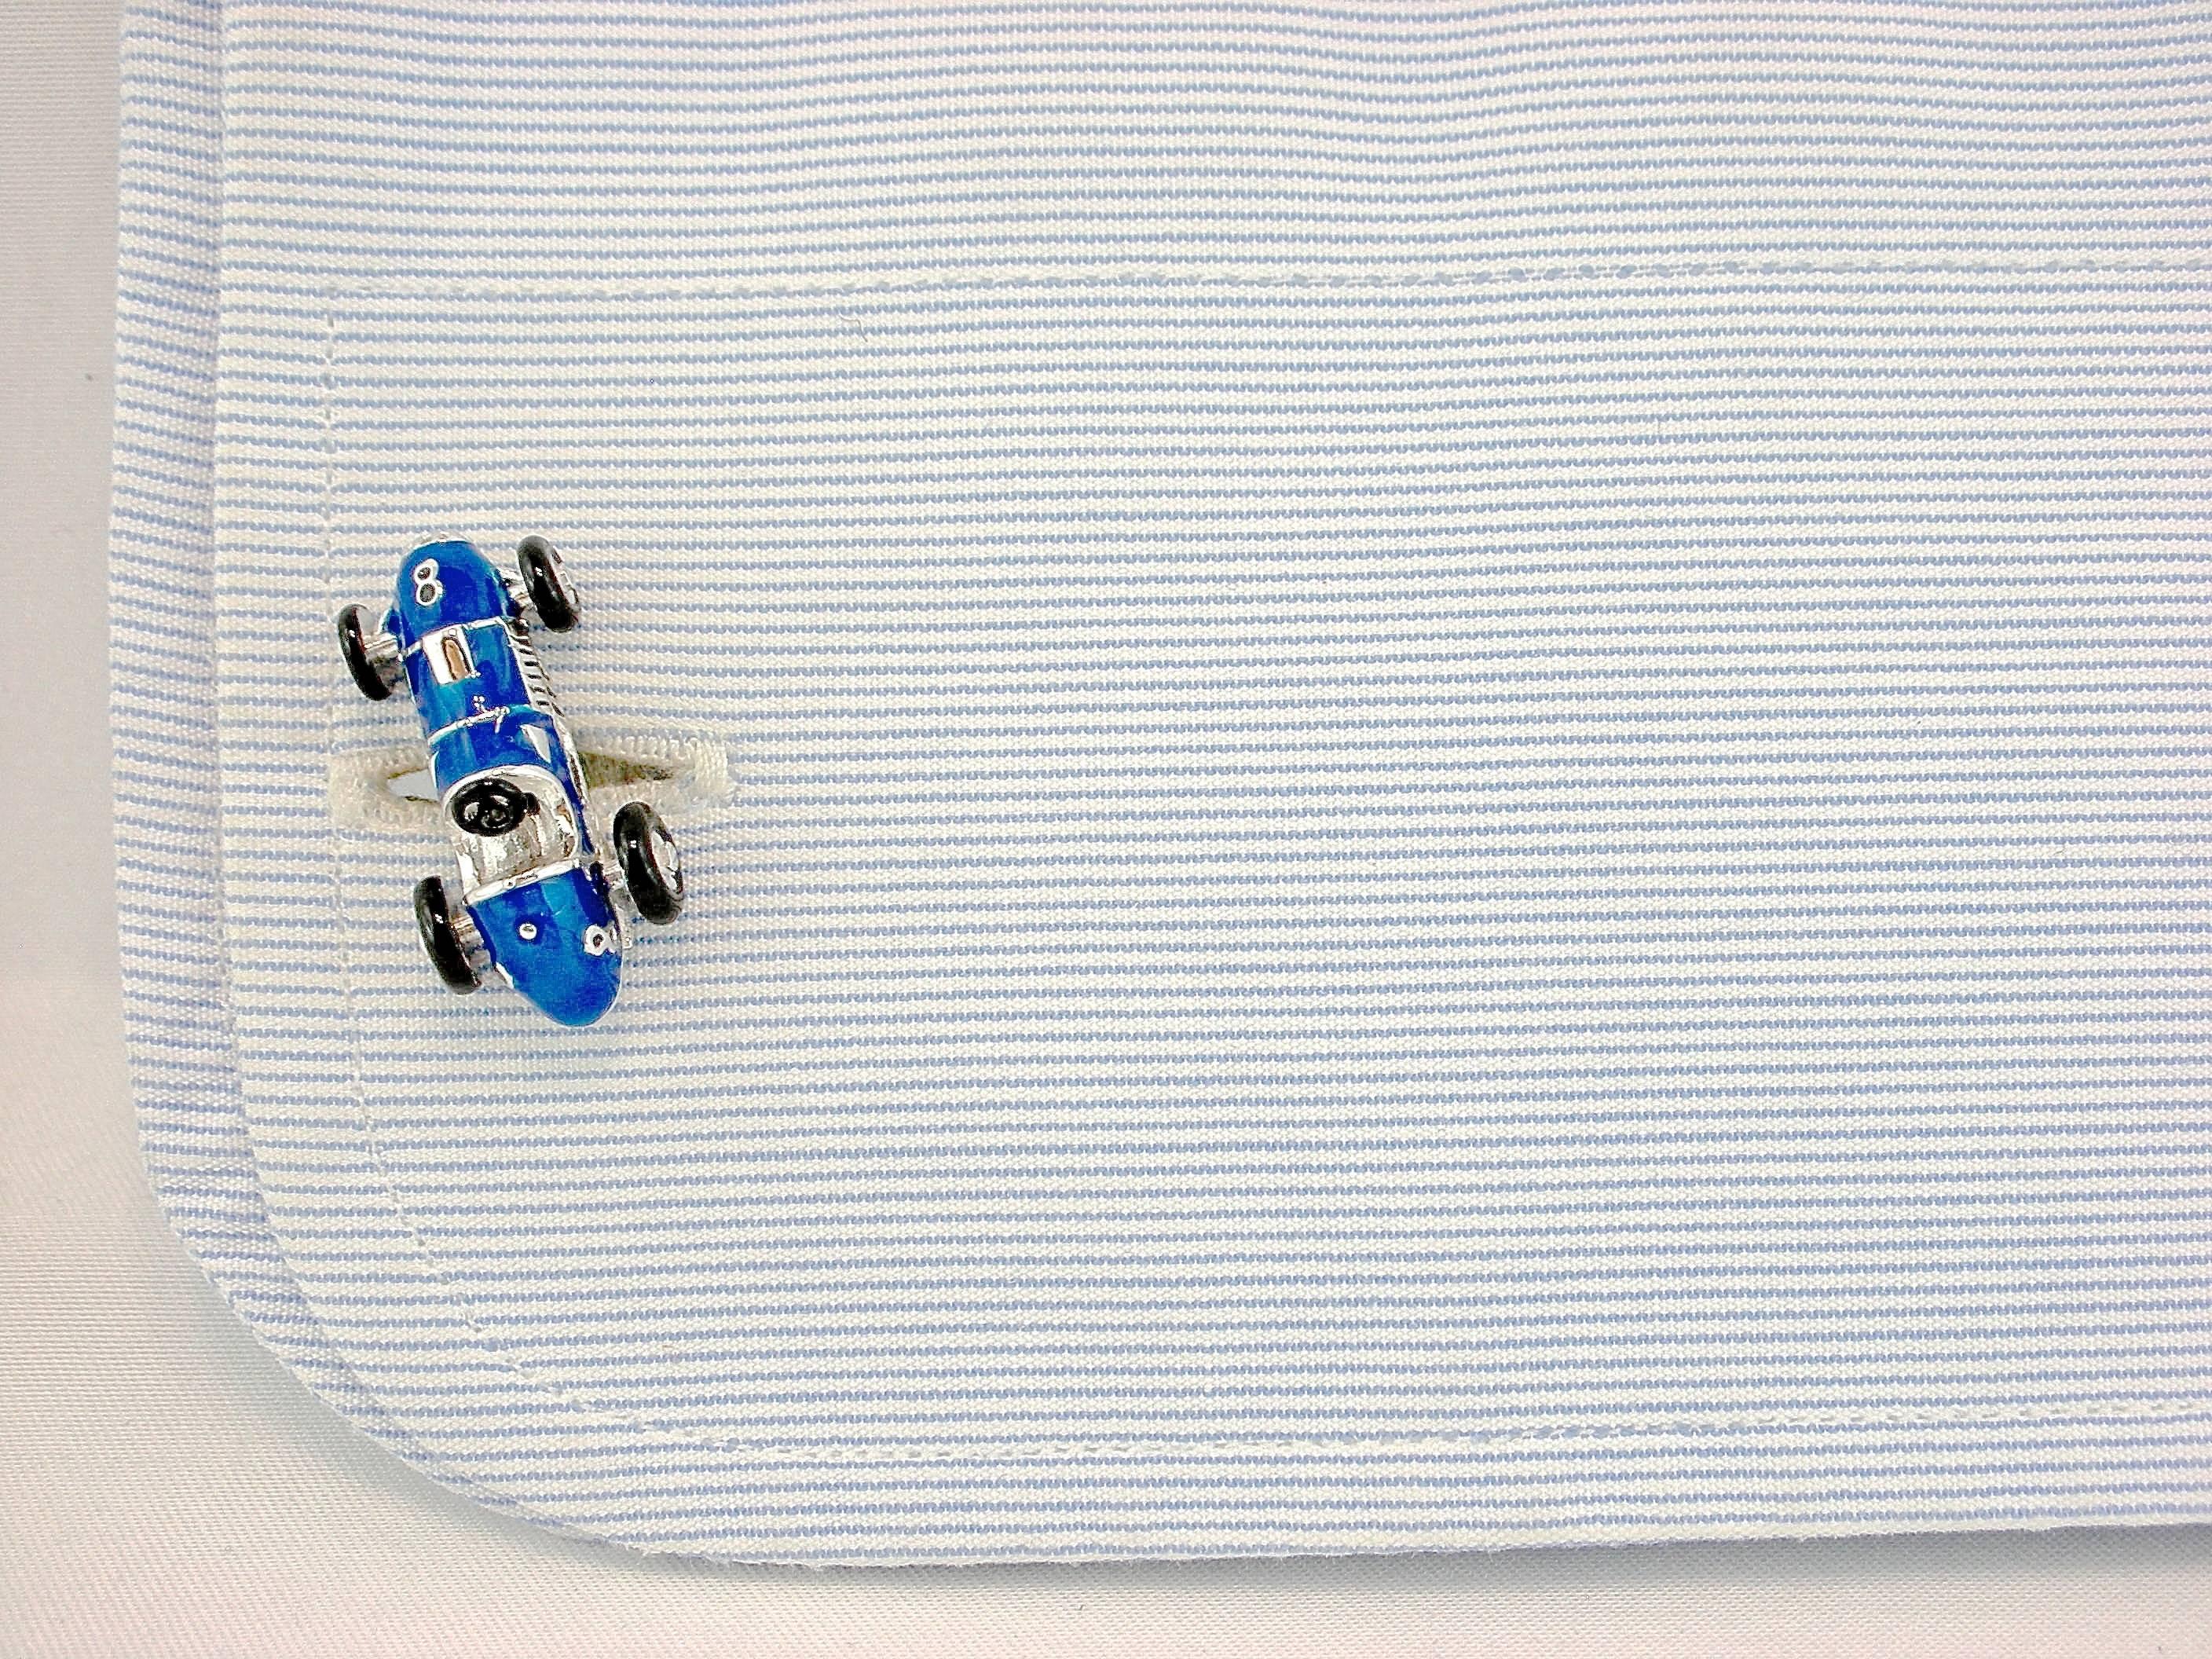 Alex Jona design collection, hand crafted in Italy, rhodium plated sterling silver cufflinks with blue enamel. Marked 